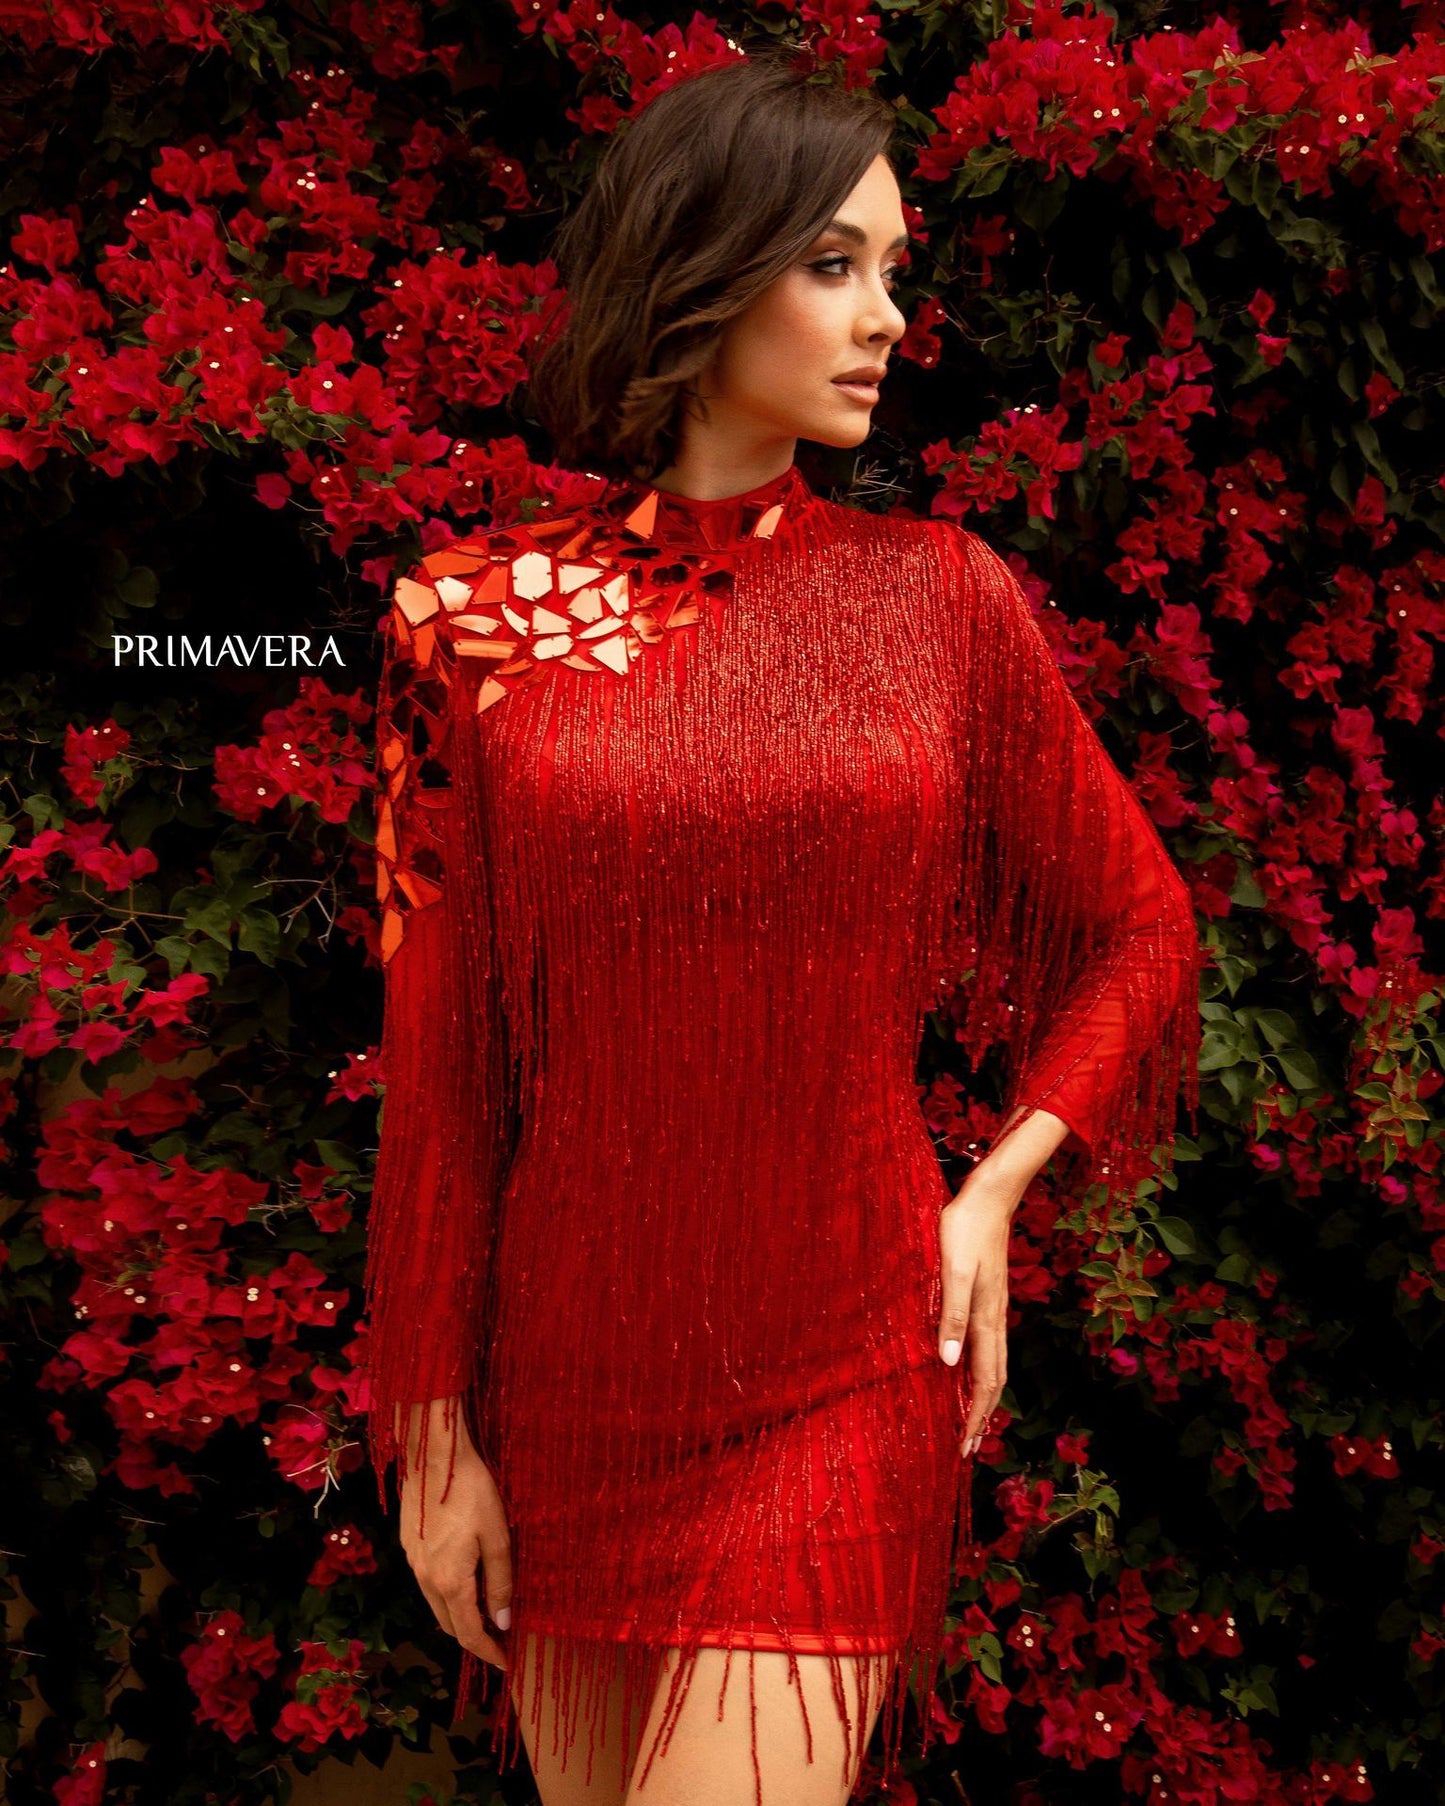 Primavera Couture 3701 is a Show Stopper! This short formal cocktail evening gown is red carpet ready with sheer long sleeves and a high neckline. Featuring hand beaded Fringe tassels along the entire gown and sleeves. high neckline with accented cut glass inspired pieces along the neck and shoulder. open cutout back. This gown has it all!  Available Sizes: 00,0,2,4,6,8,10,12,14,16,18  Available Colors: Blue, Red